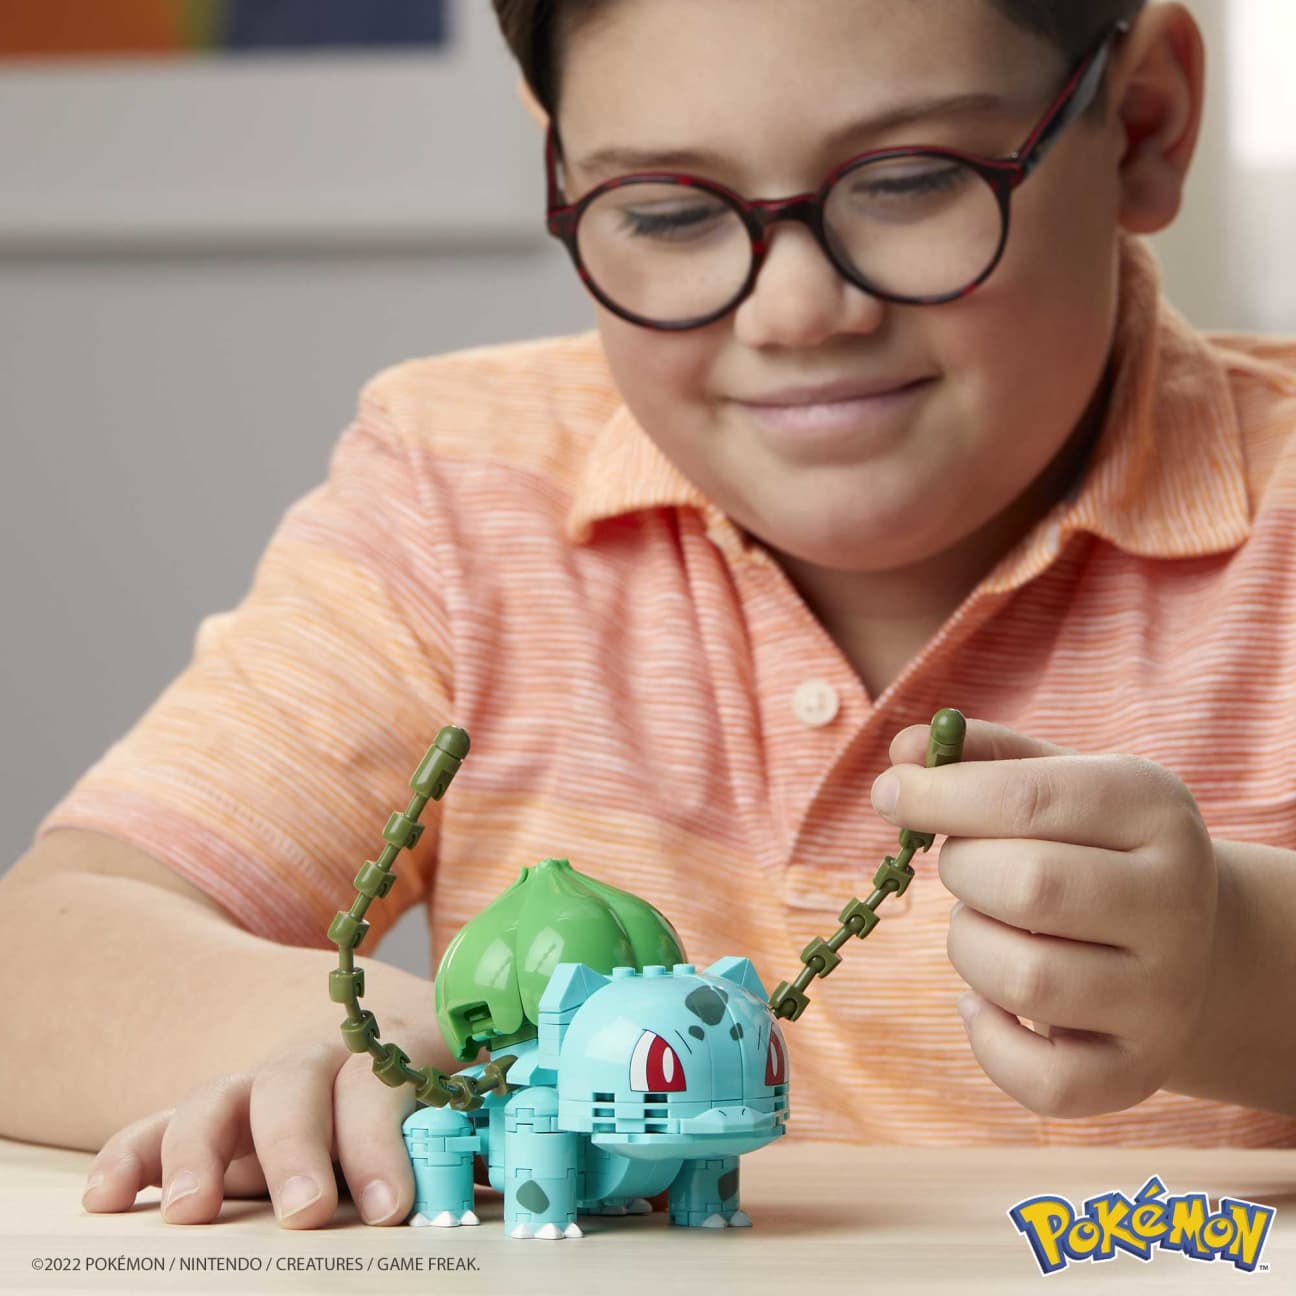 MATTEL  - Mega construx pokemon bulbasaur, 175 bricks and pieces, over 4-inches tall, ages 7+, gvk83